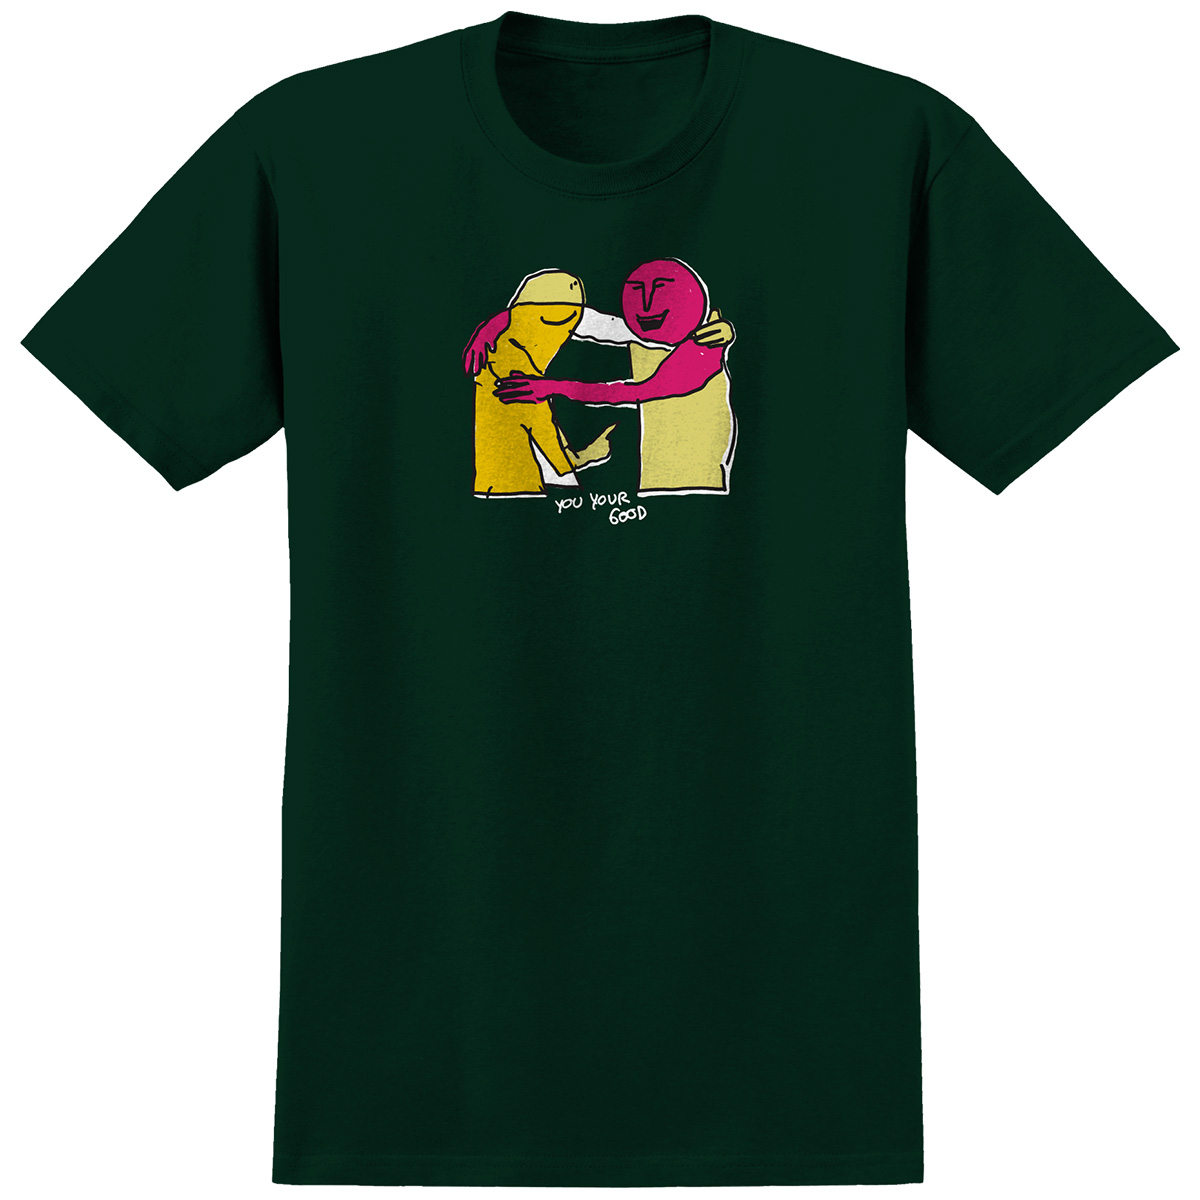 Krooked Your Good T-Shirt Forest Green